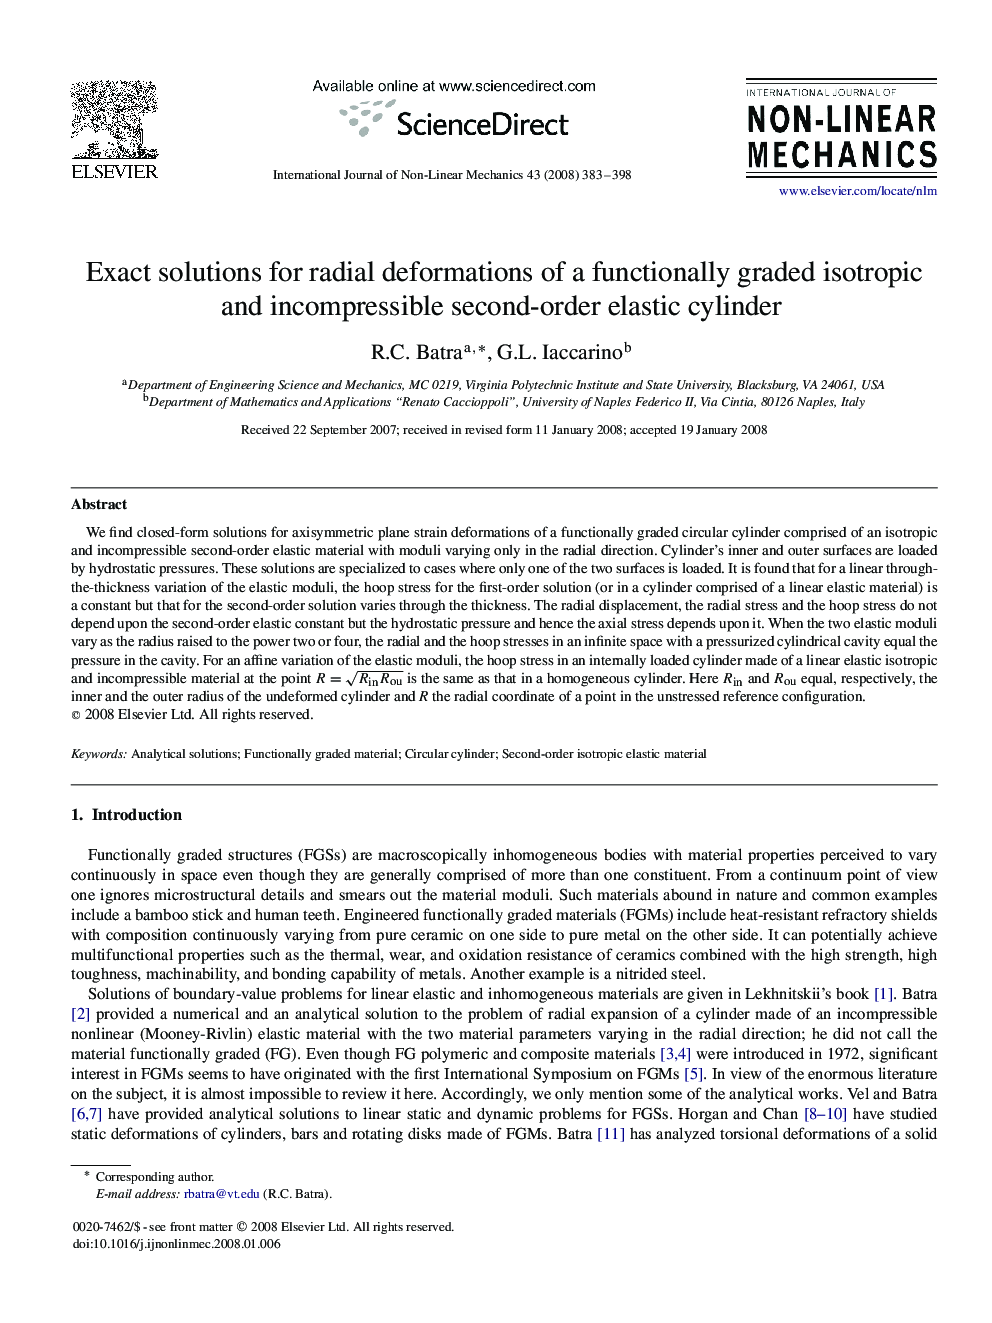 Exact solutions for radial deformations of a functionally graded isotropic and incompressible second-order elastic cylinder